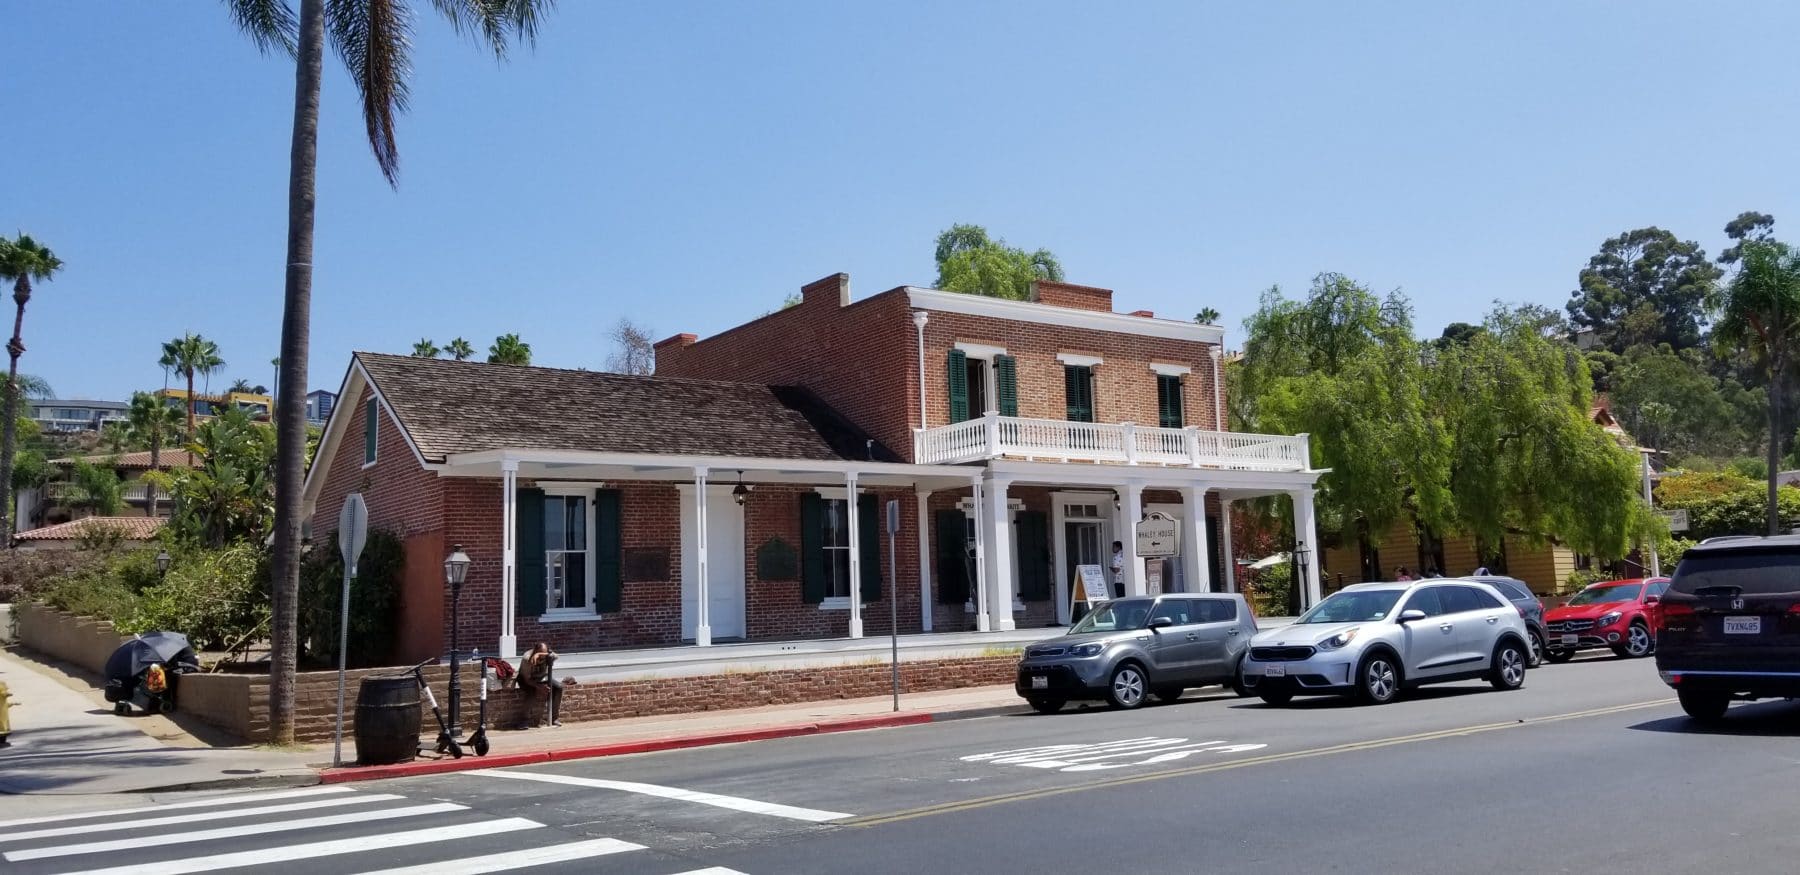 Whaley House in Old Town San Diego